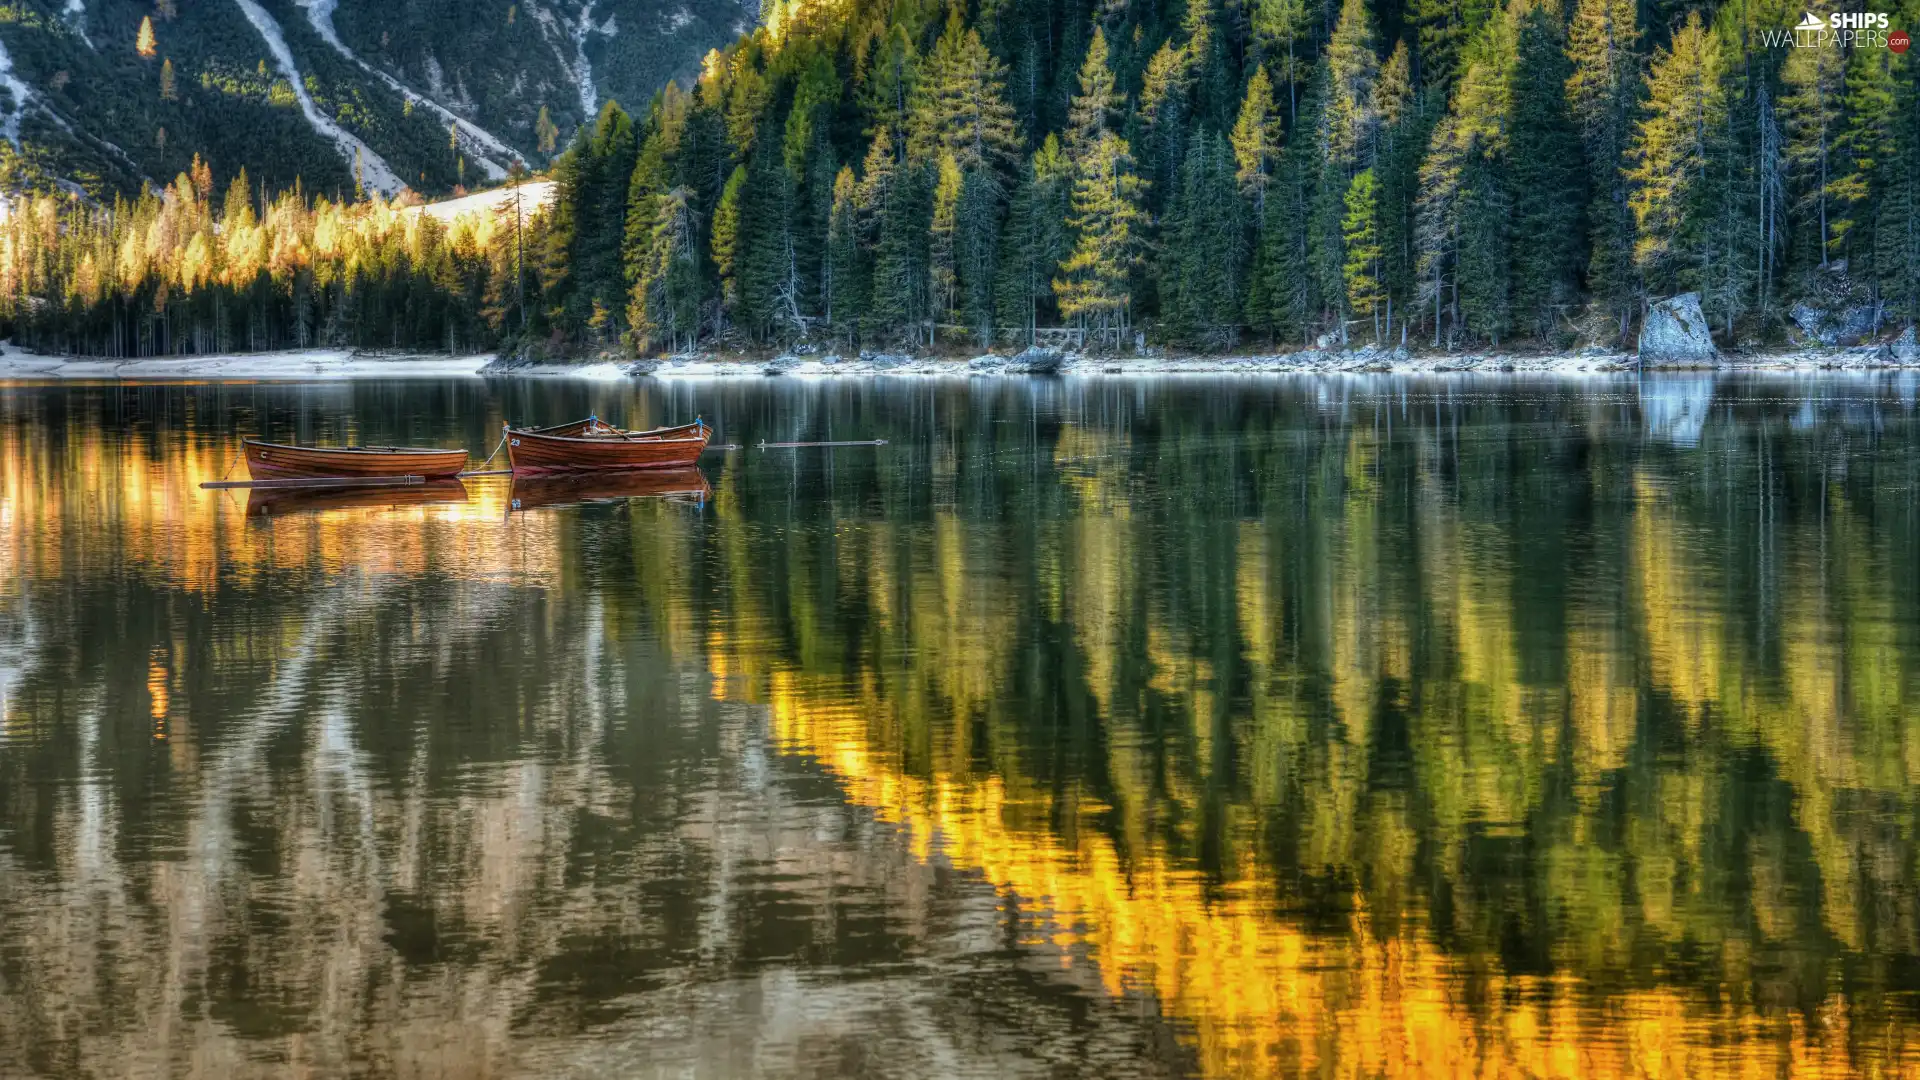 Pragser Wildsee, forest, Dolomites, lake, boats, South Tyrol, Italy